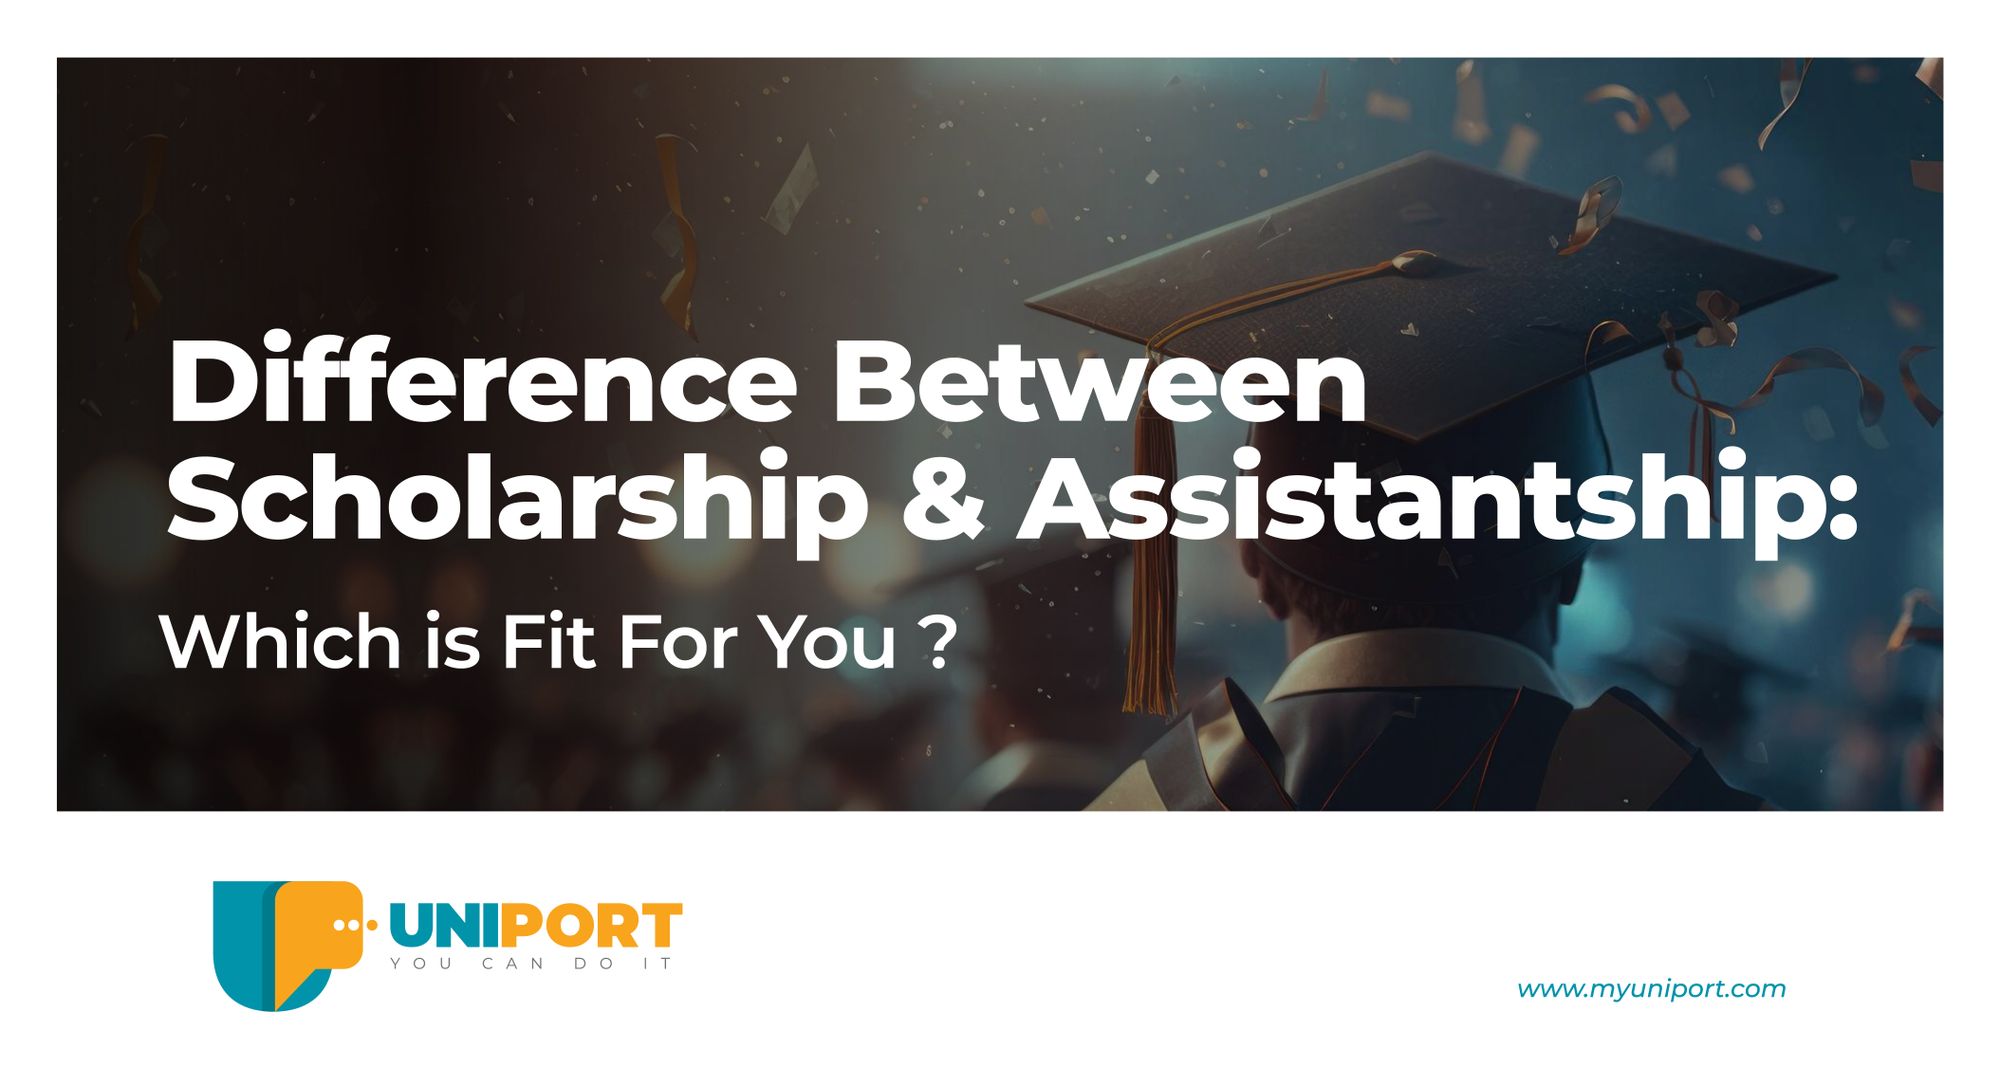 Difference Between Scholarship & Assistantship: Which Is Fit For You?